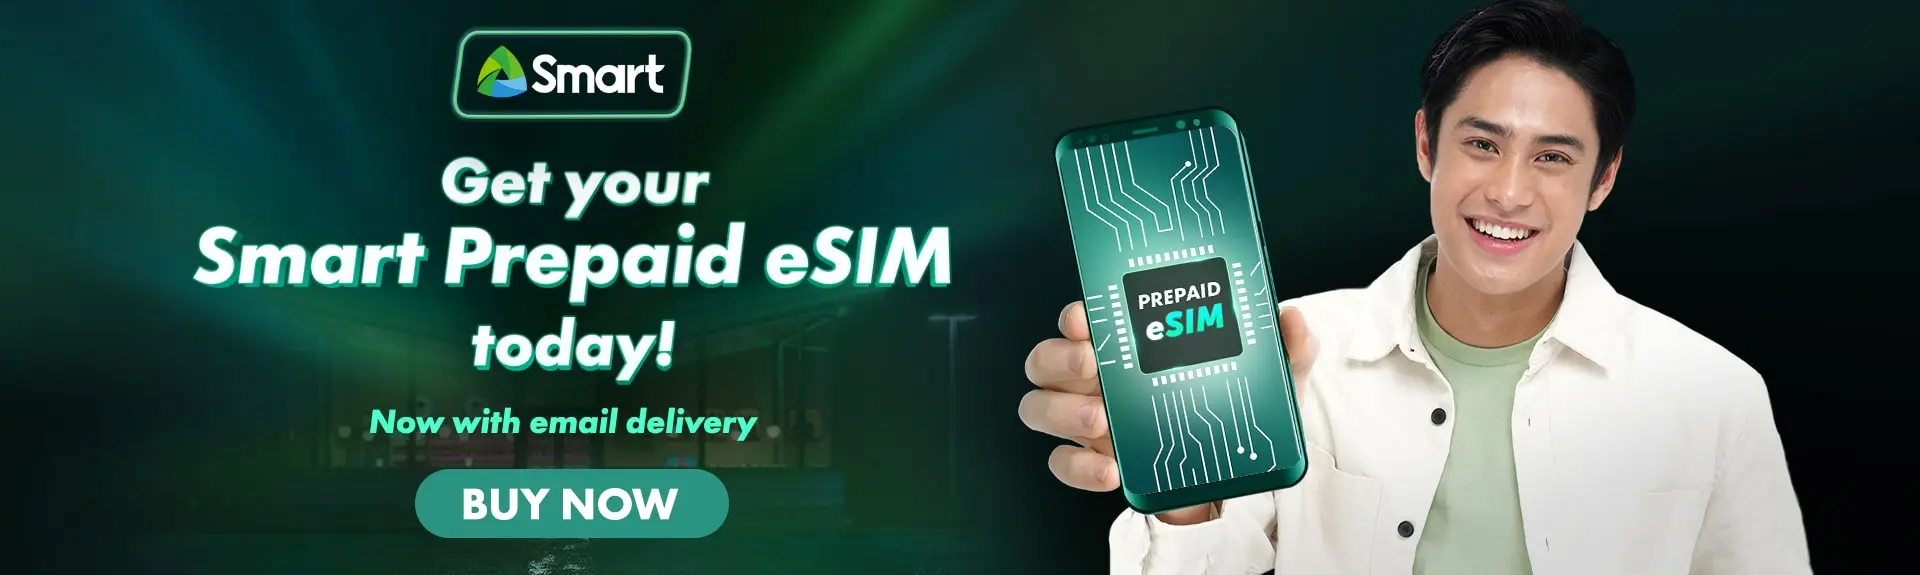 Smart Email Delivery eSIM